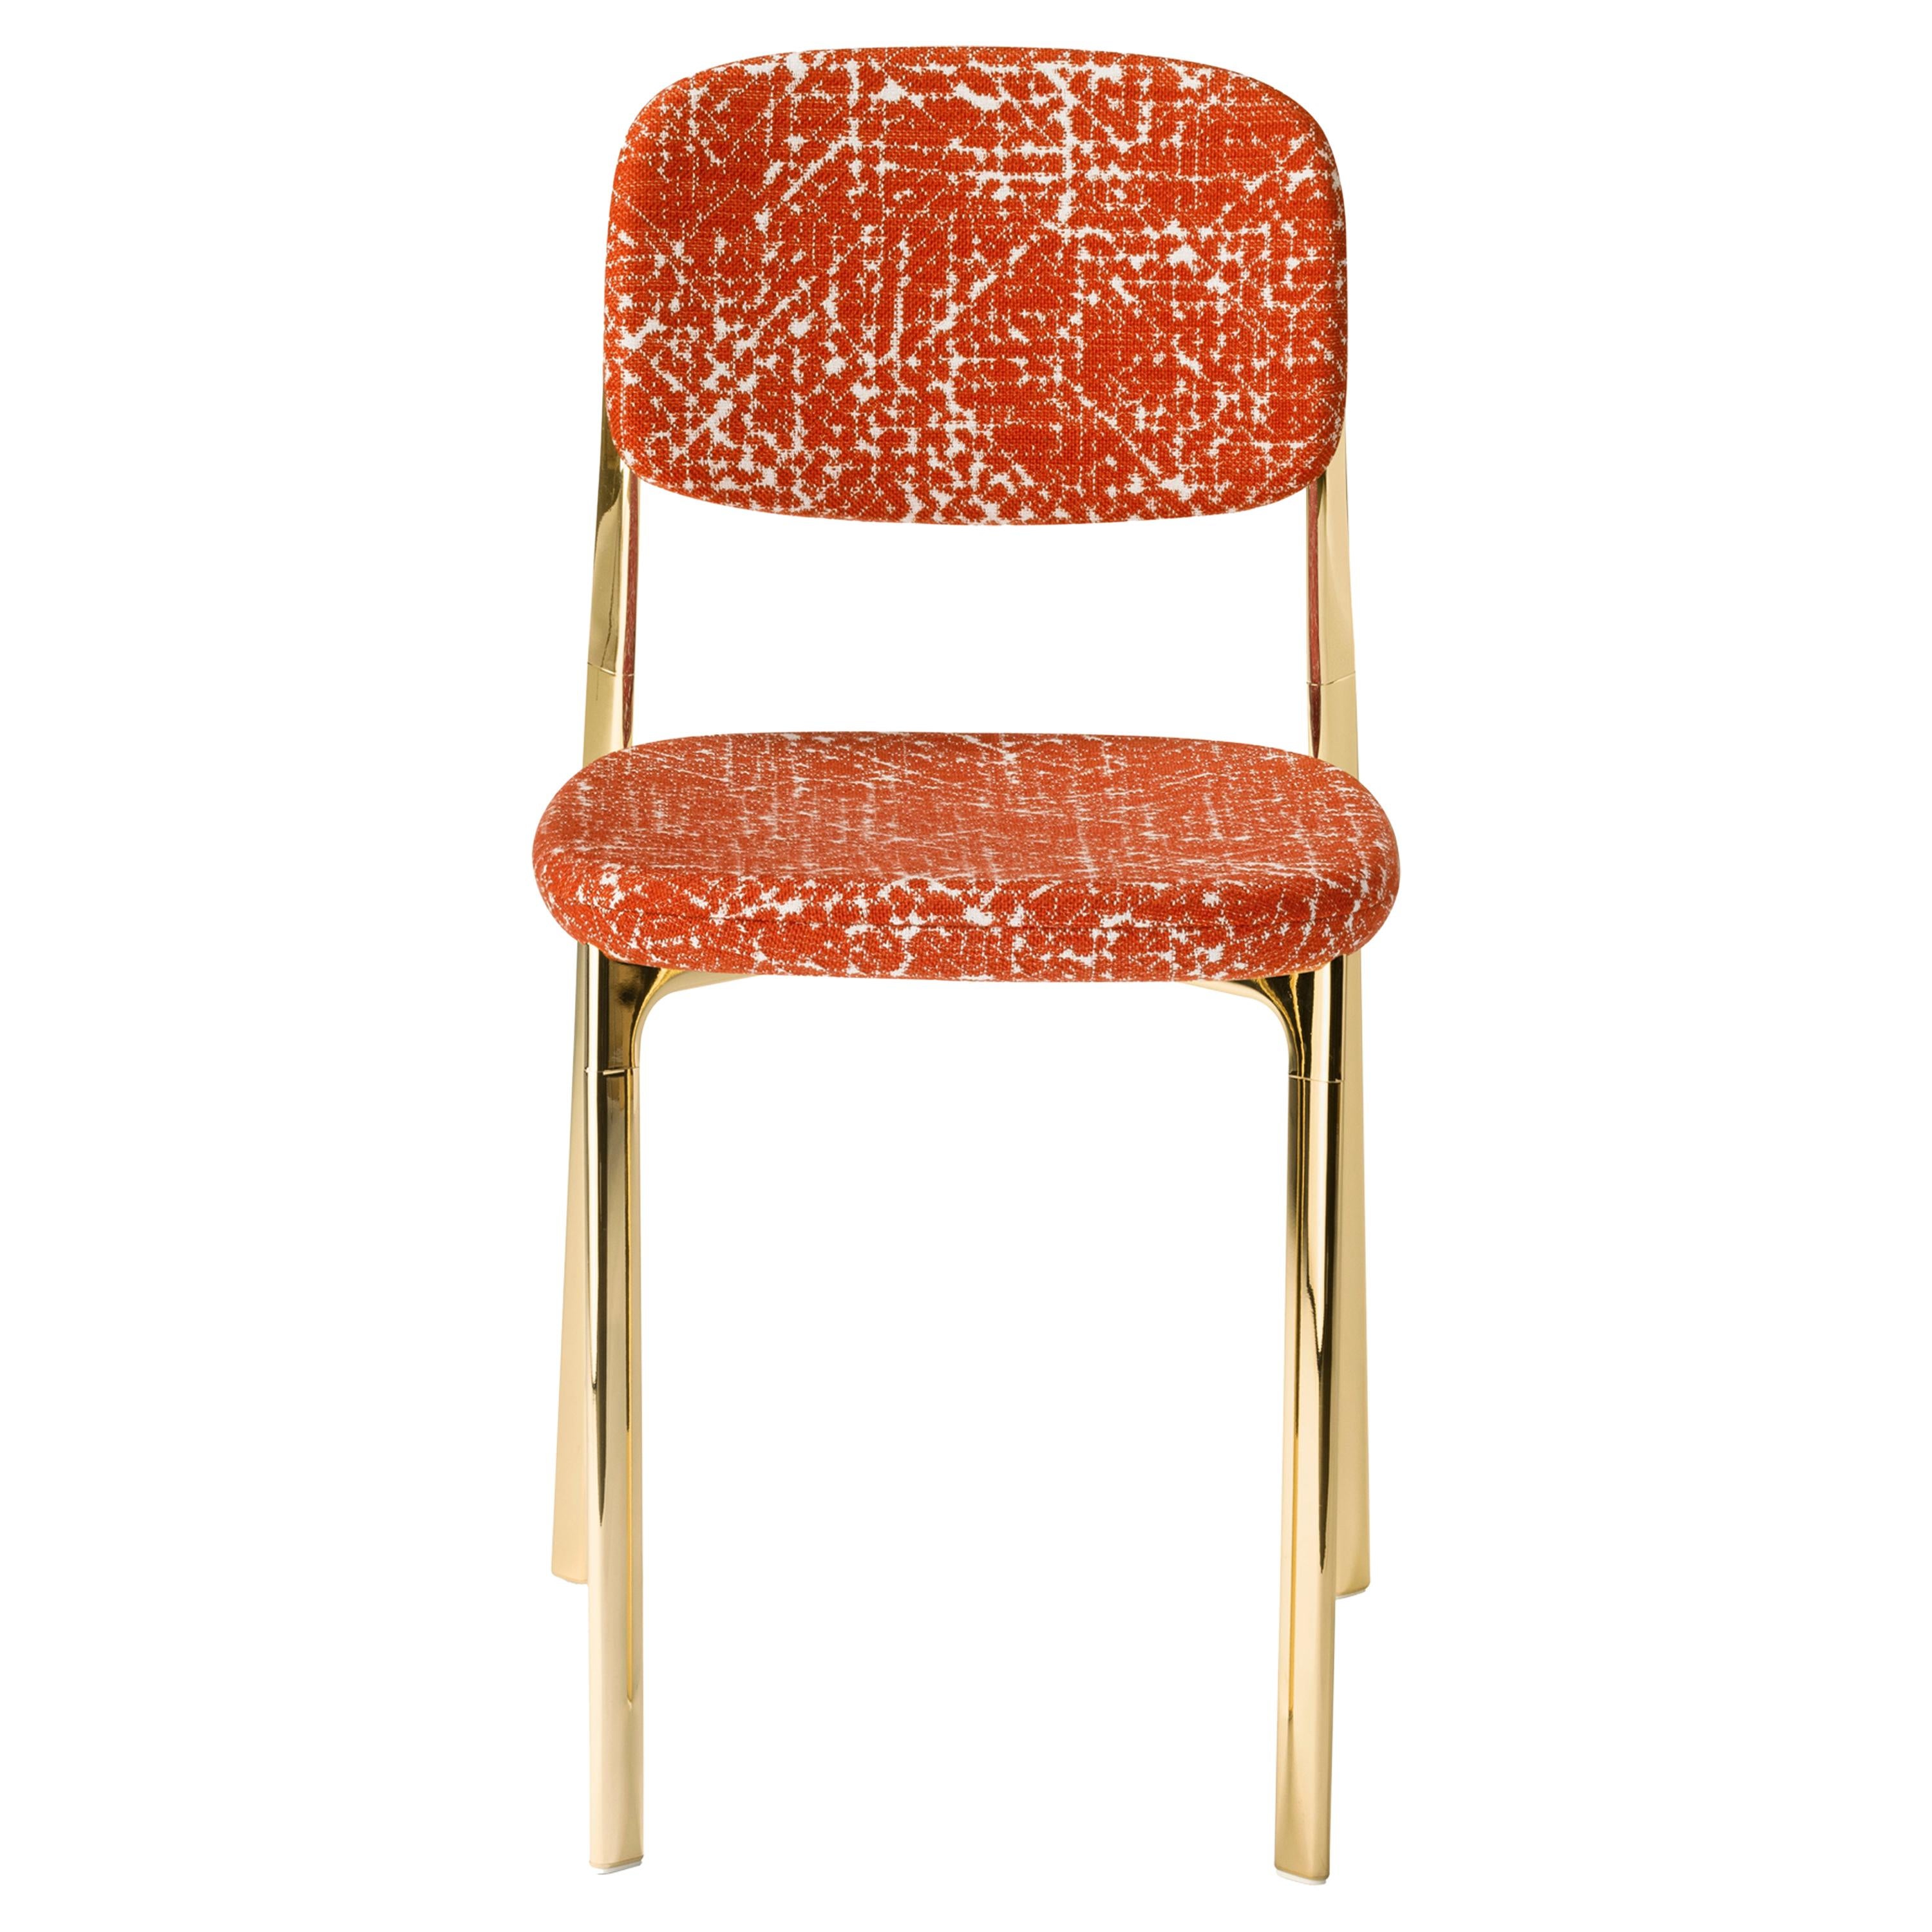 Coast Chair in Orange Fabric with Polished Brass by Branch